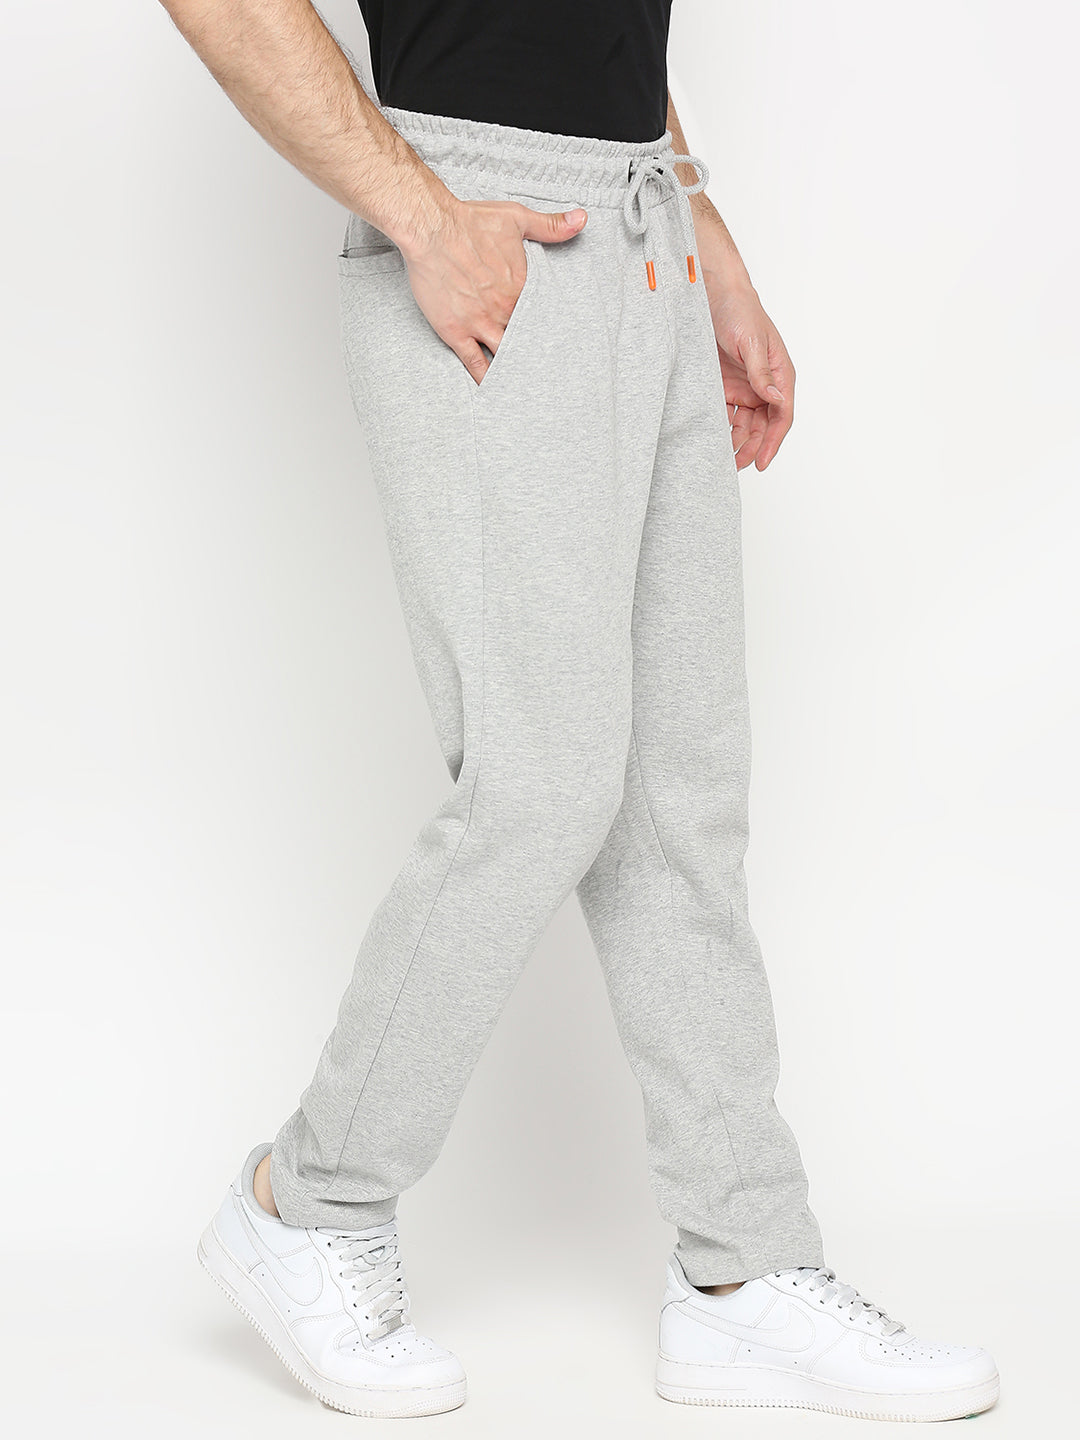 Men Cotton Blend Knitted Grey Trackpant - Underjeans by Spykar